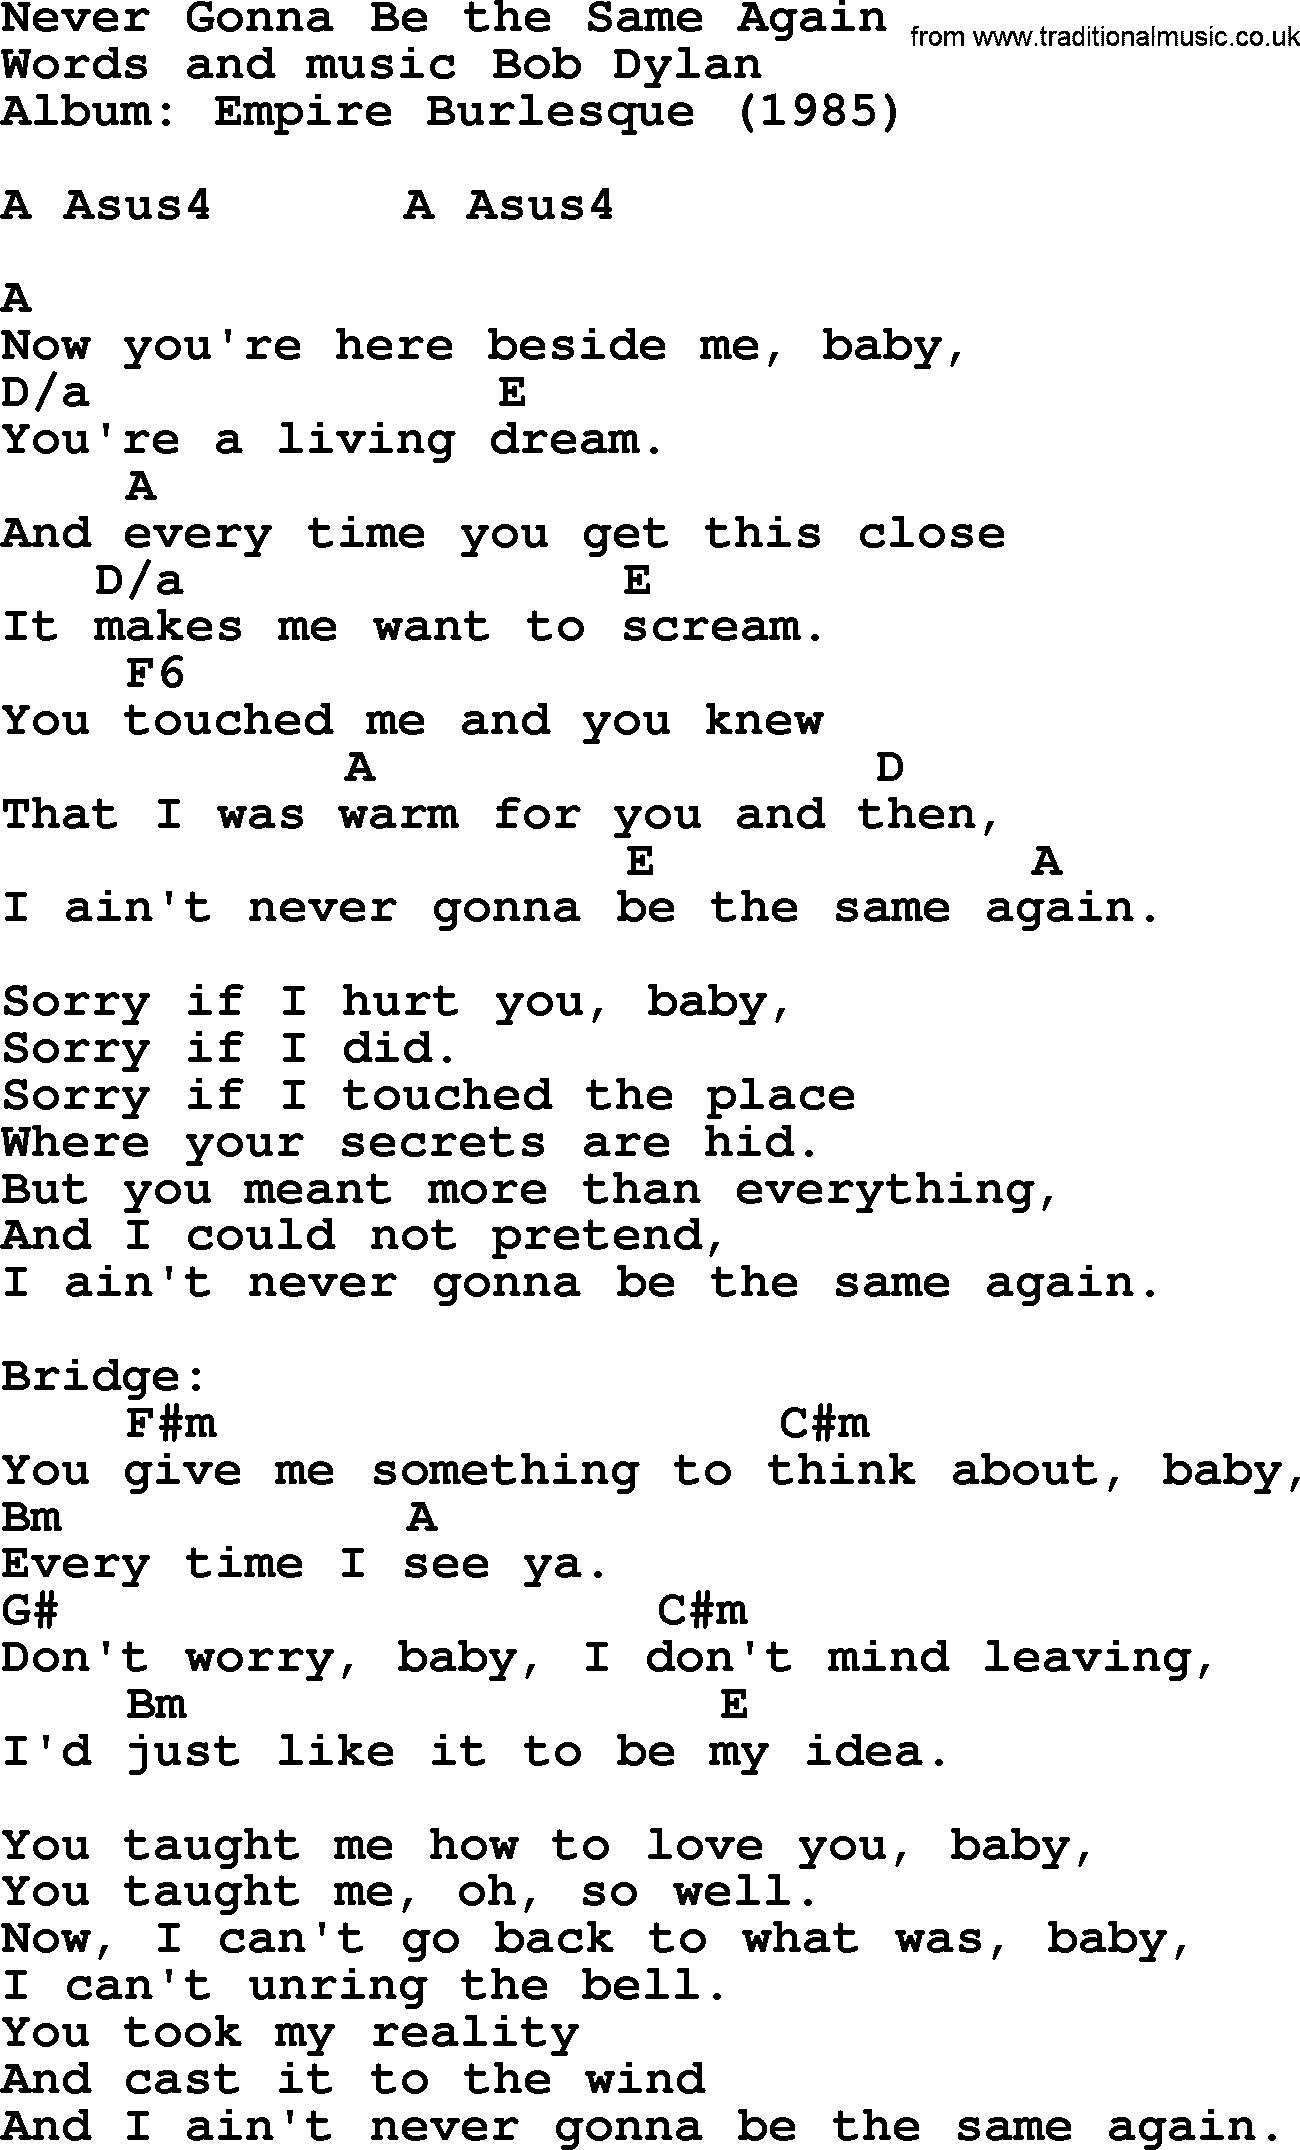 Bob Dylan song, lyrics with chords - Never Gonna Be the Same Again